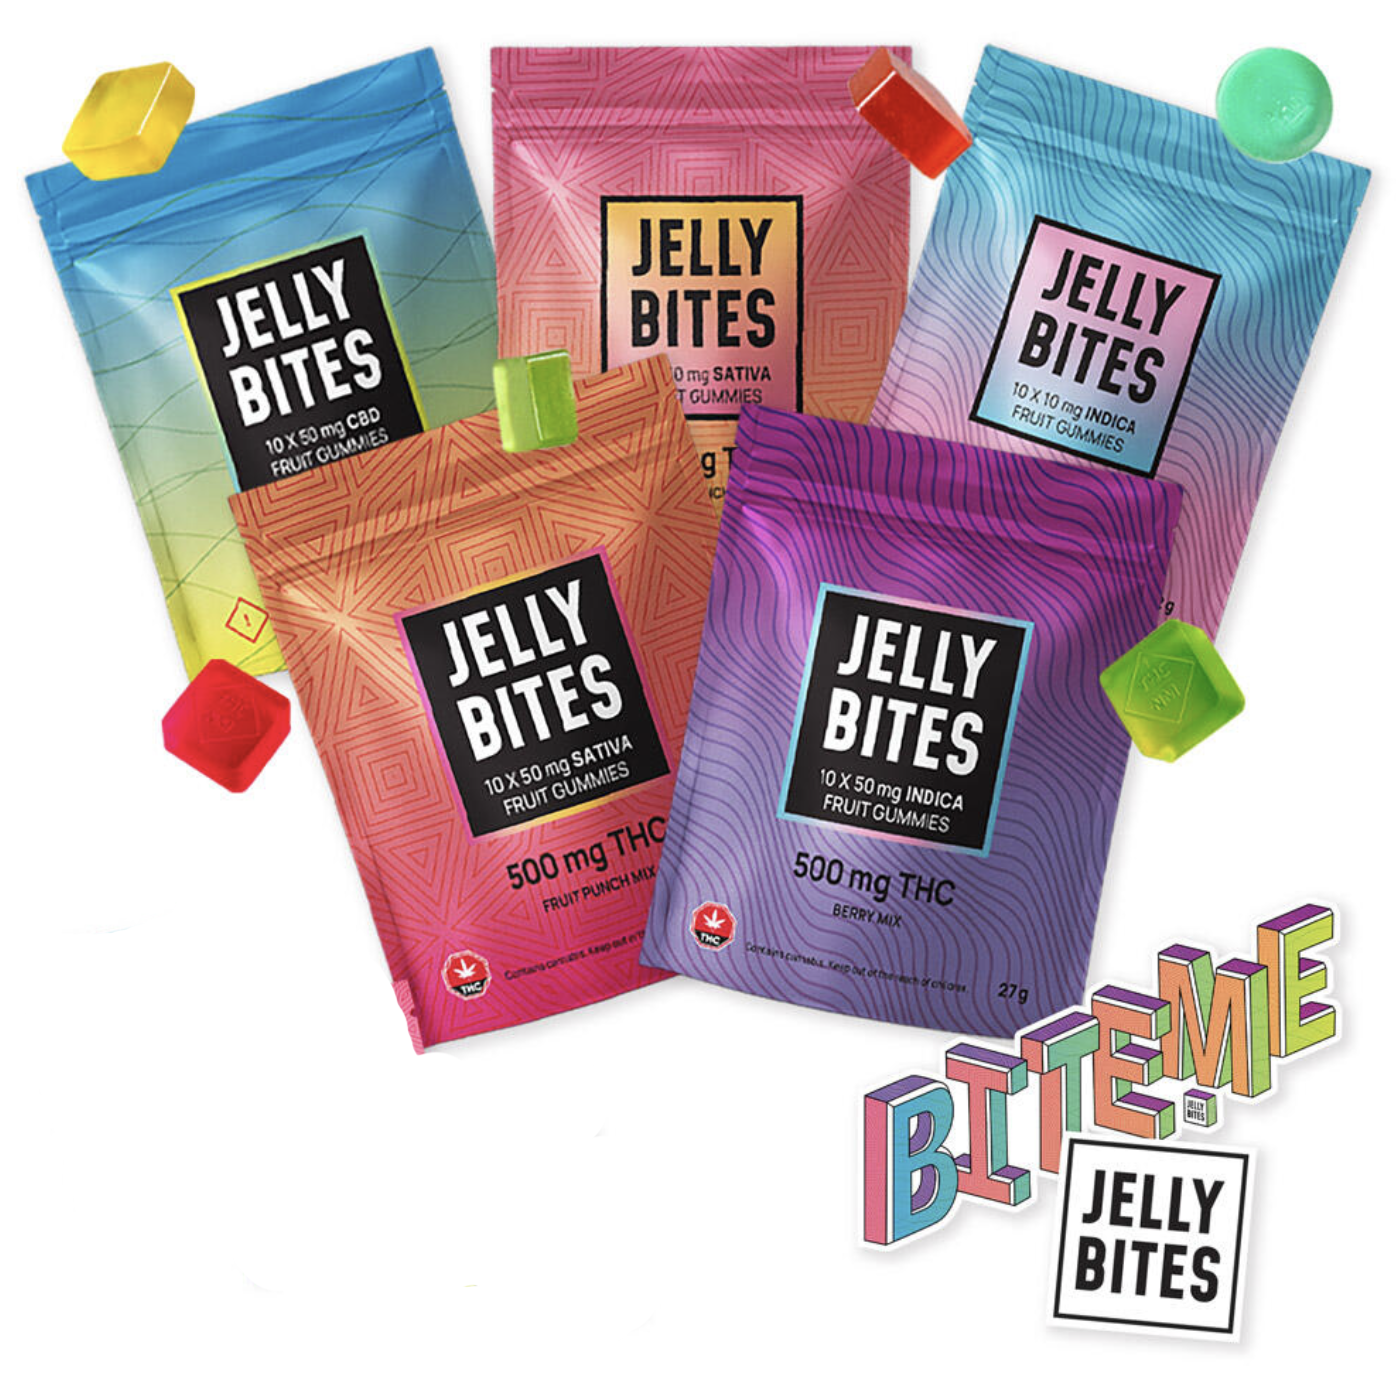 Extra Strength Jelly Bites 100 mg and 500mg THC